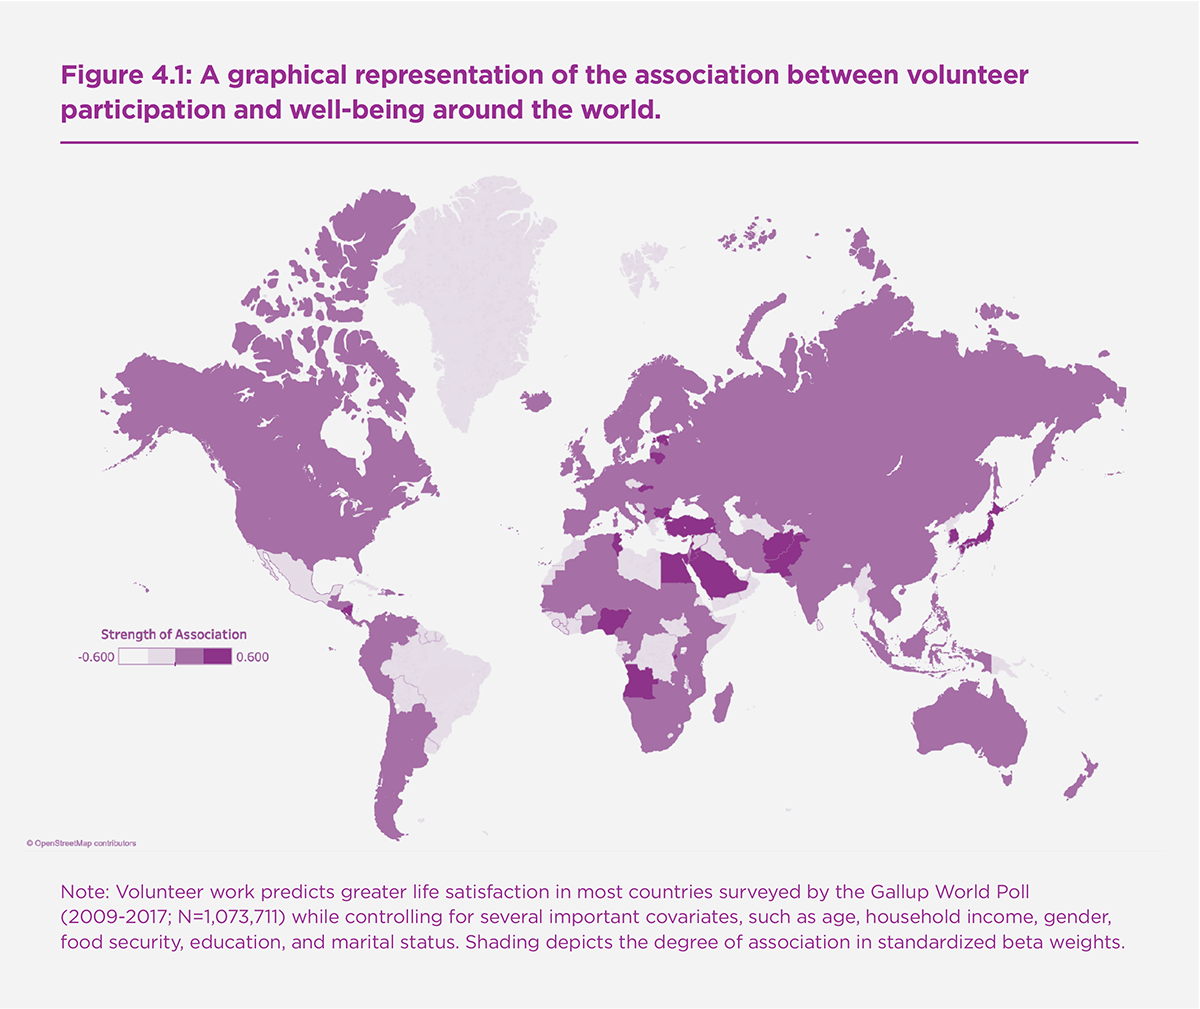 Figure 4.1. A graphical representation of the association between volunteer participation and well-being around the world.